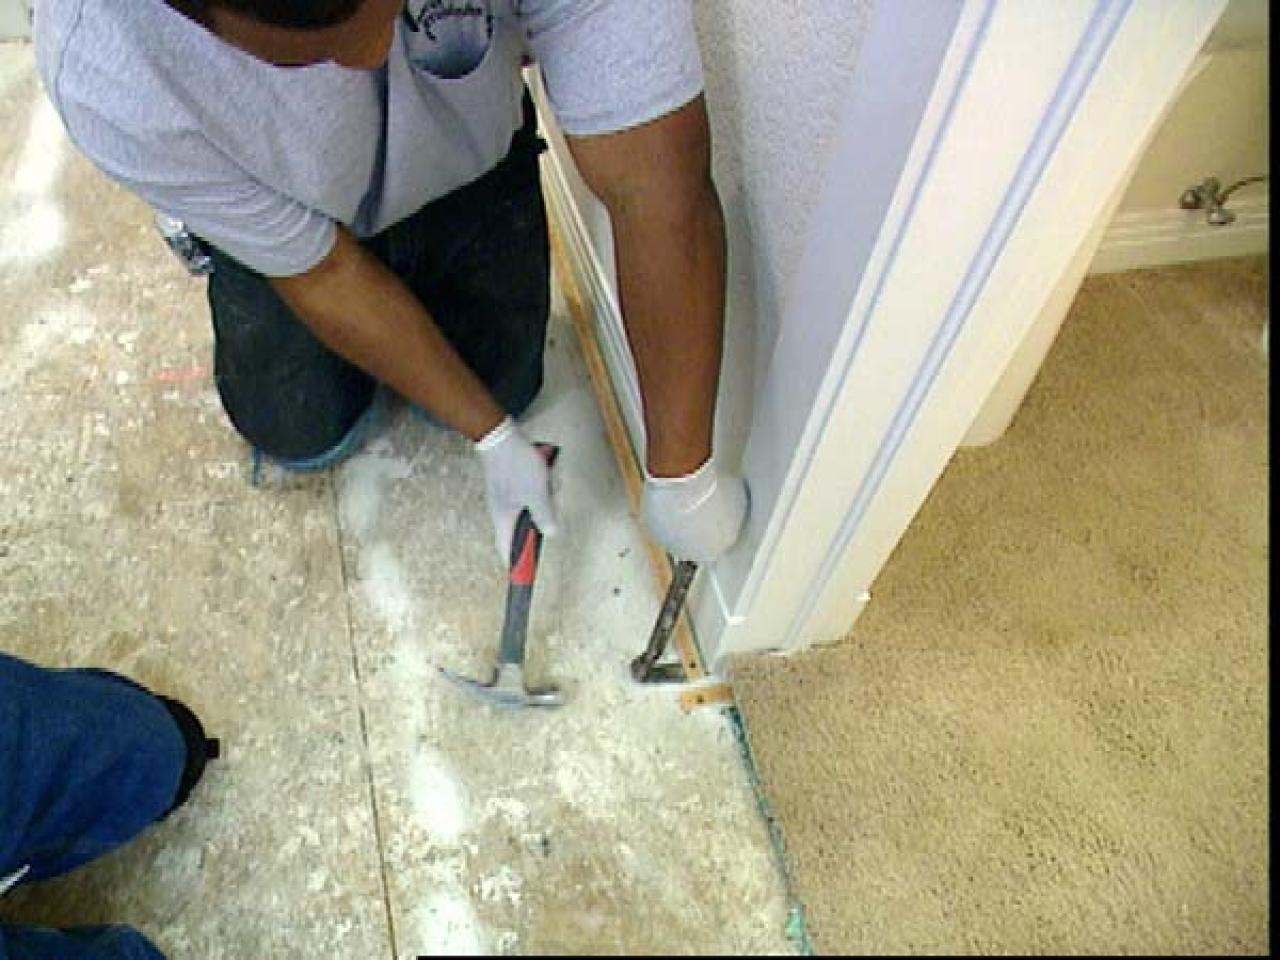 How To Install Tile Flooring Tos, Replacing Floor Tile